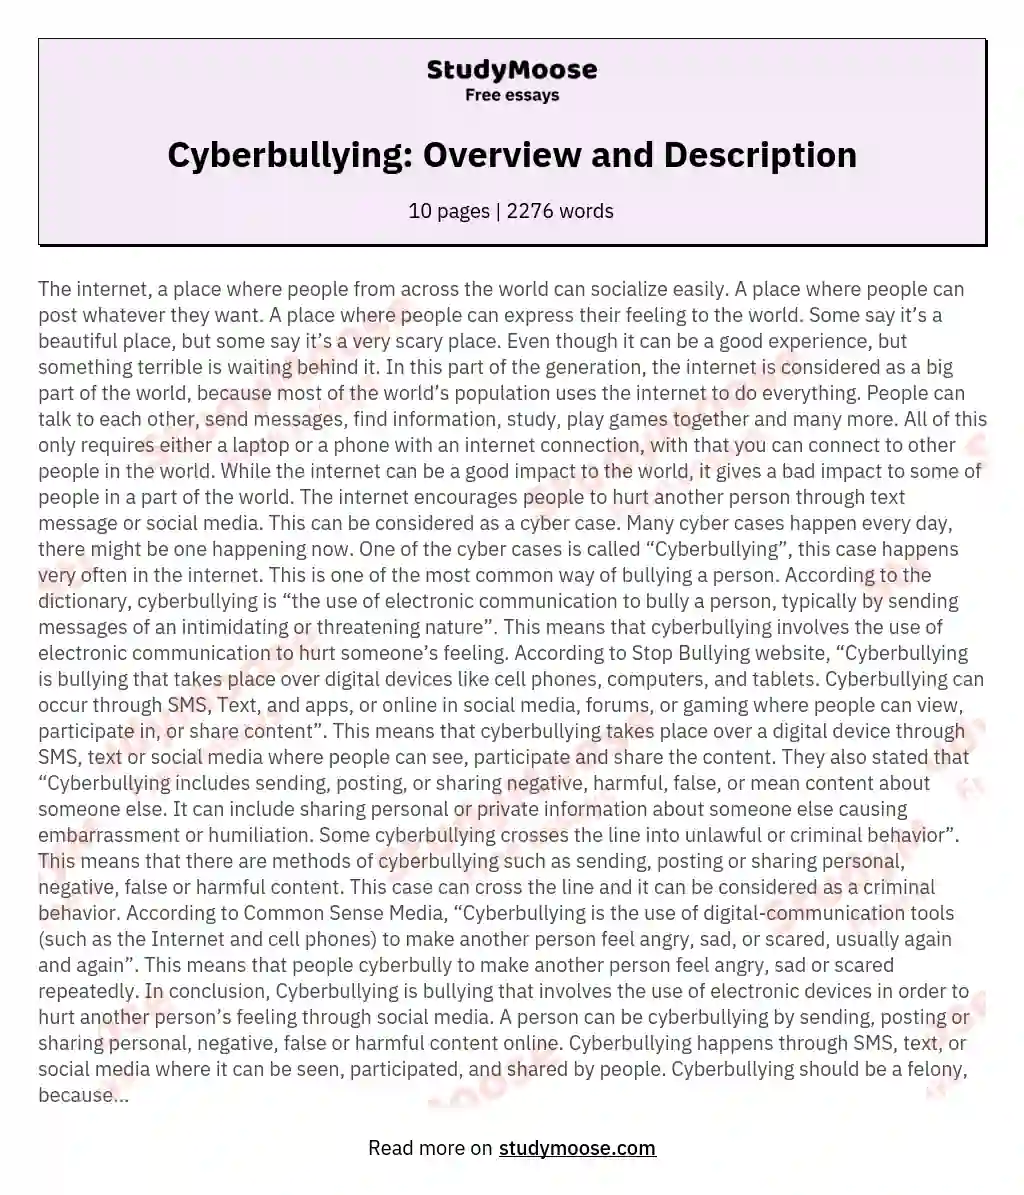 Cyberbullying: Overview and Description